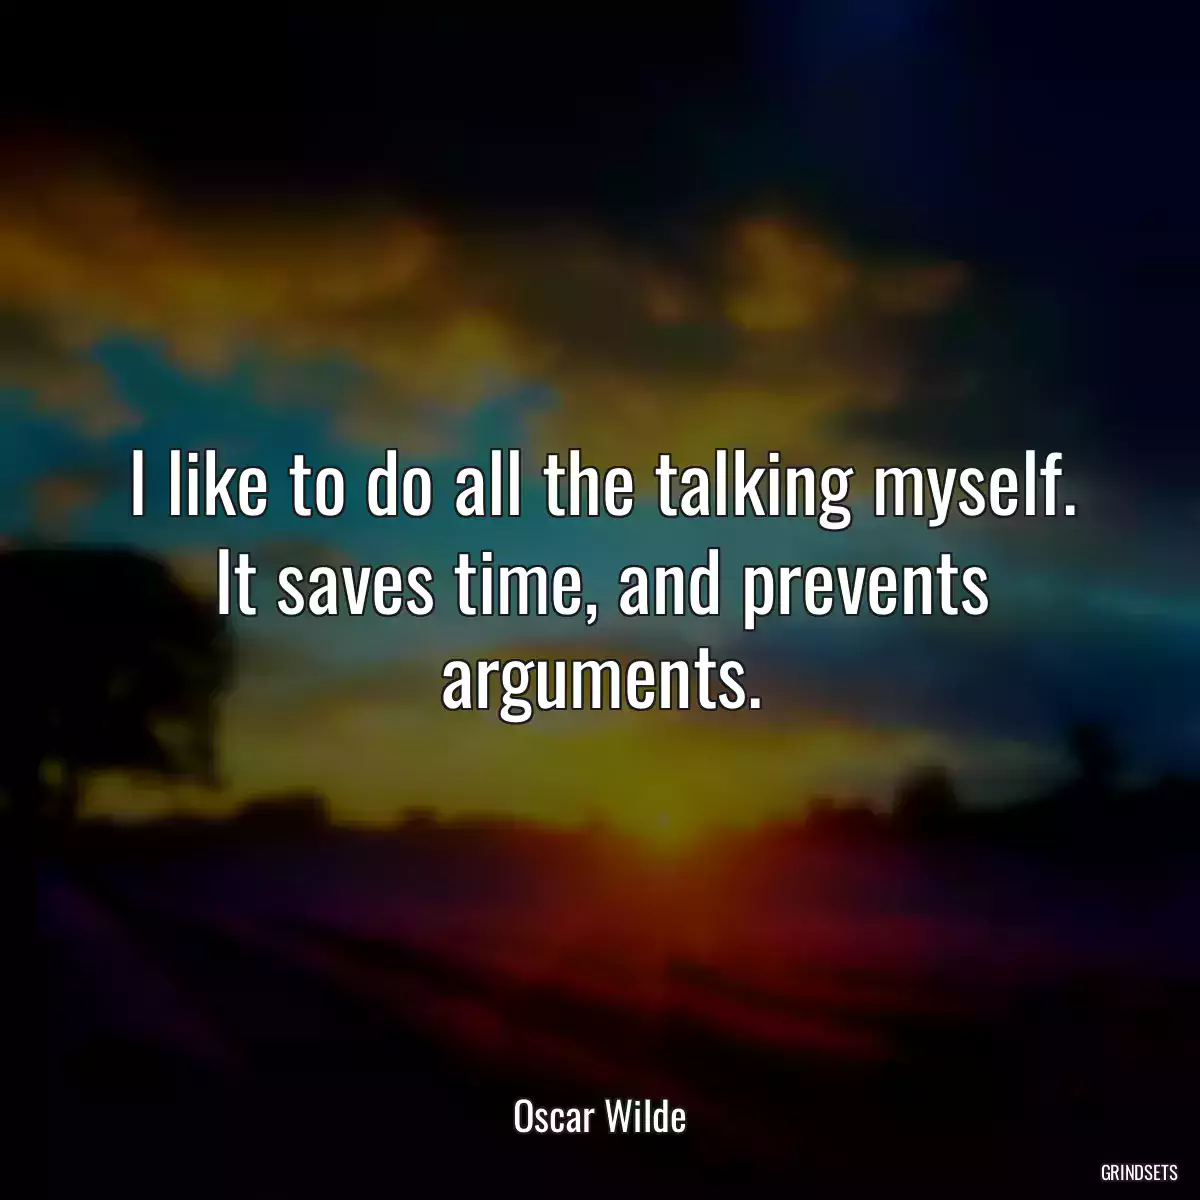 I like to do all the talking myself. It saves time, and prevents arguments.